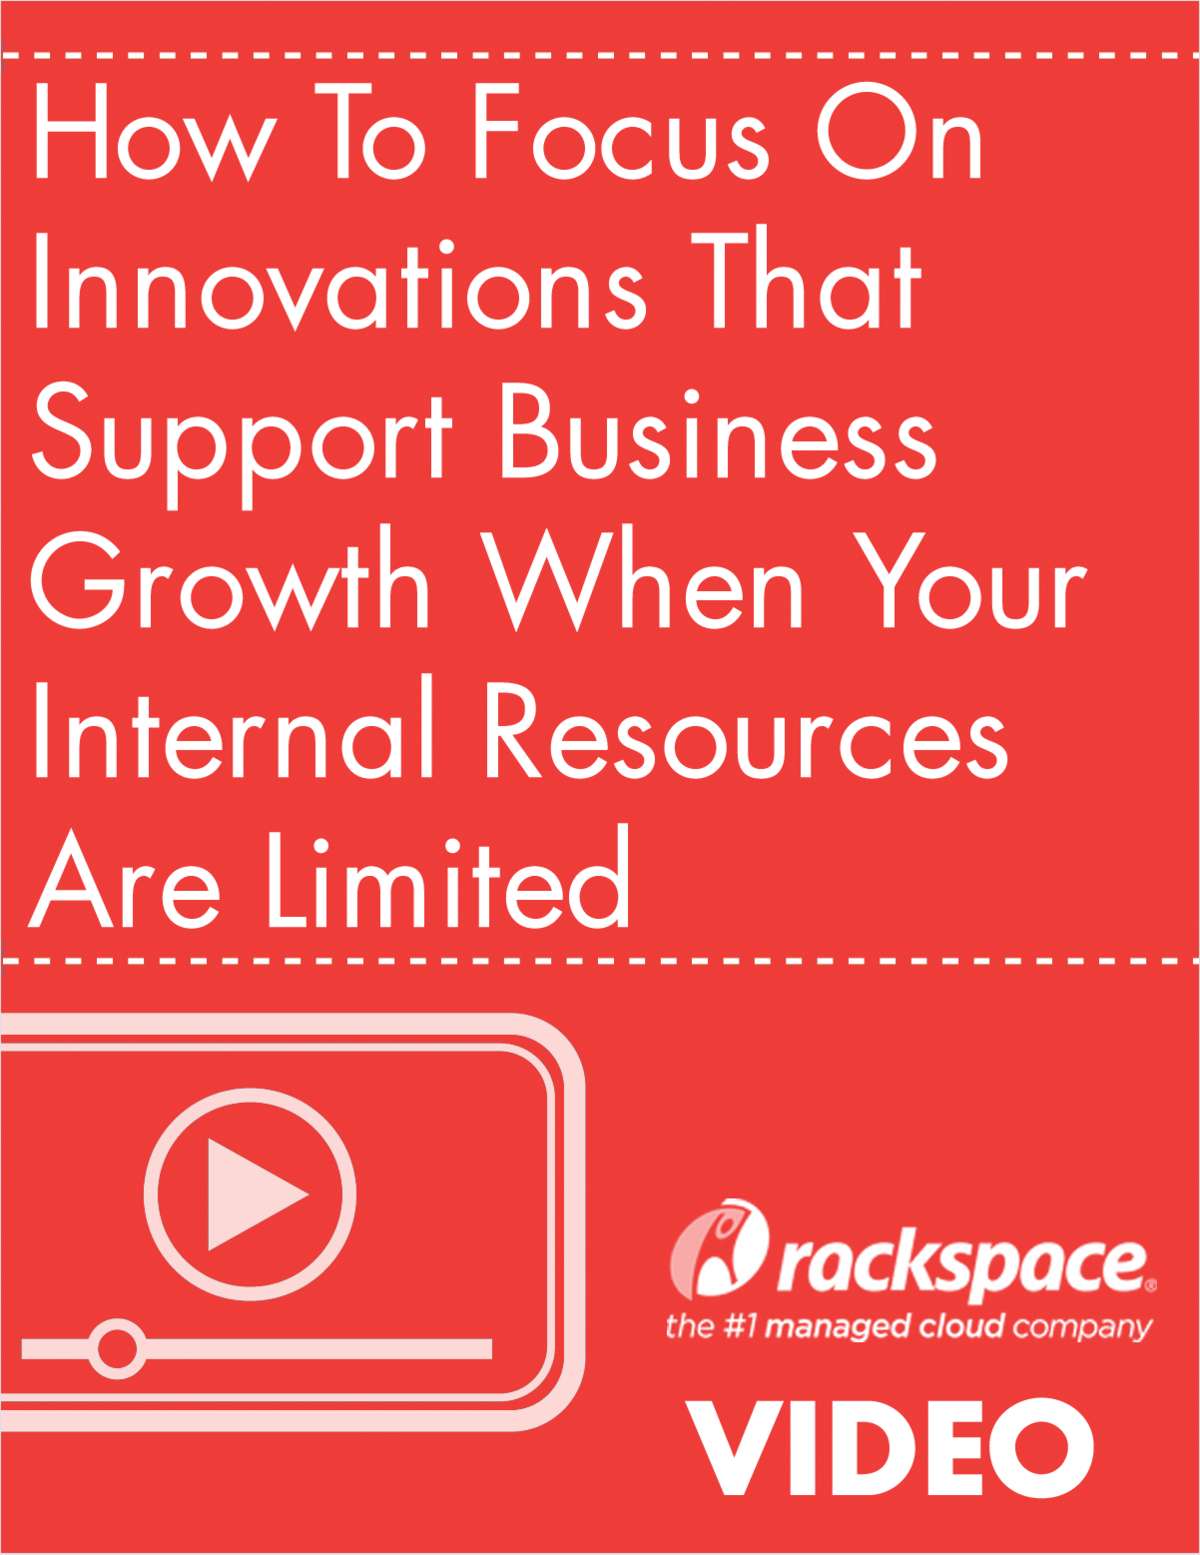 How To Focus On Innovations That Support Business Growth When Your Internal Resources Are Limited